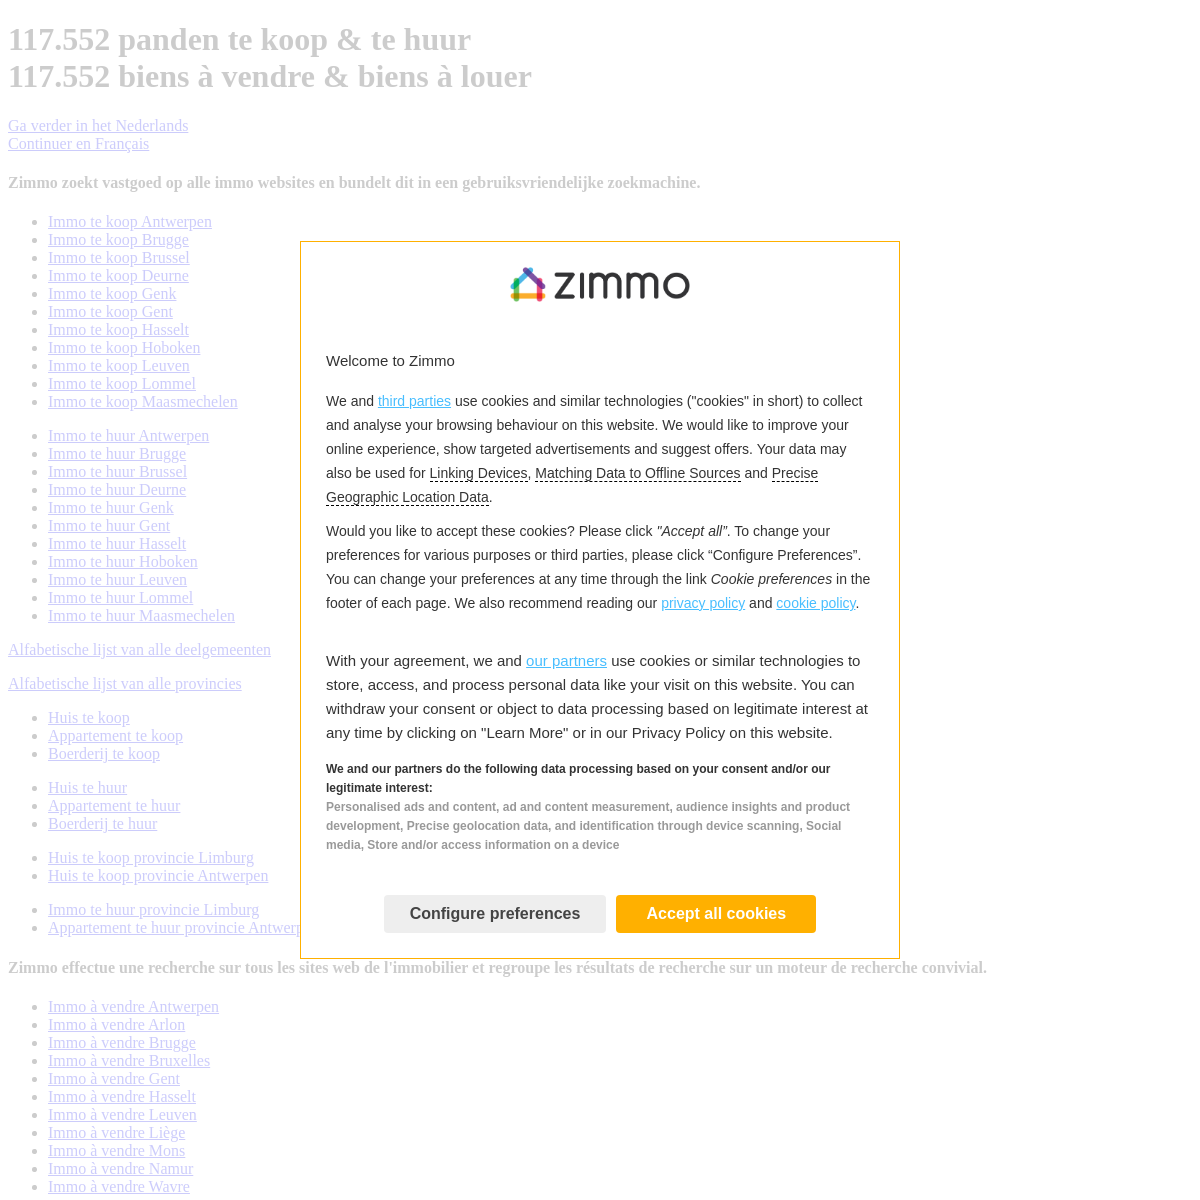 A complete backup of zimmo.be